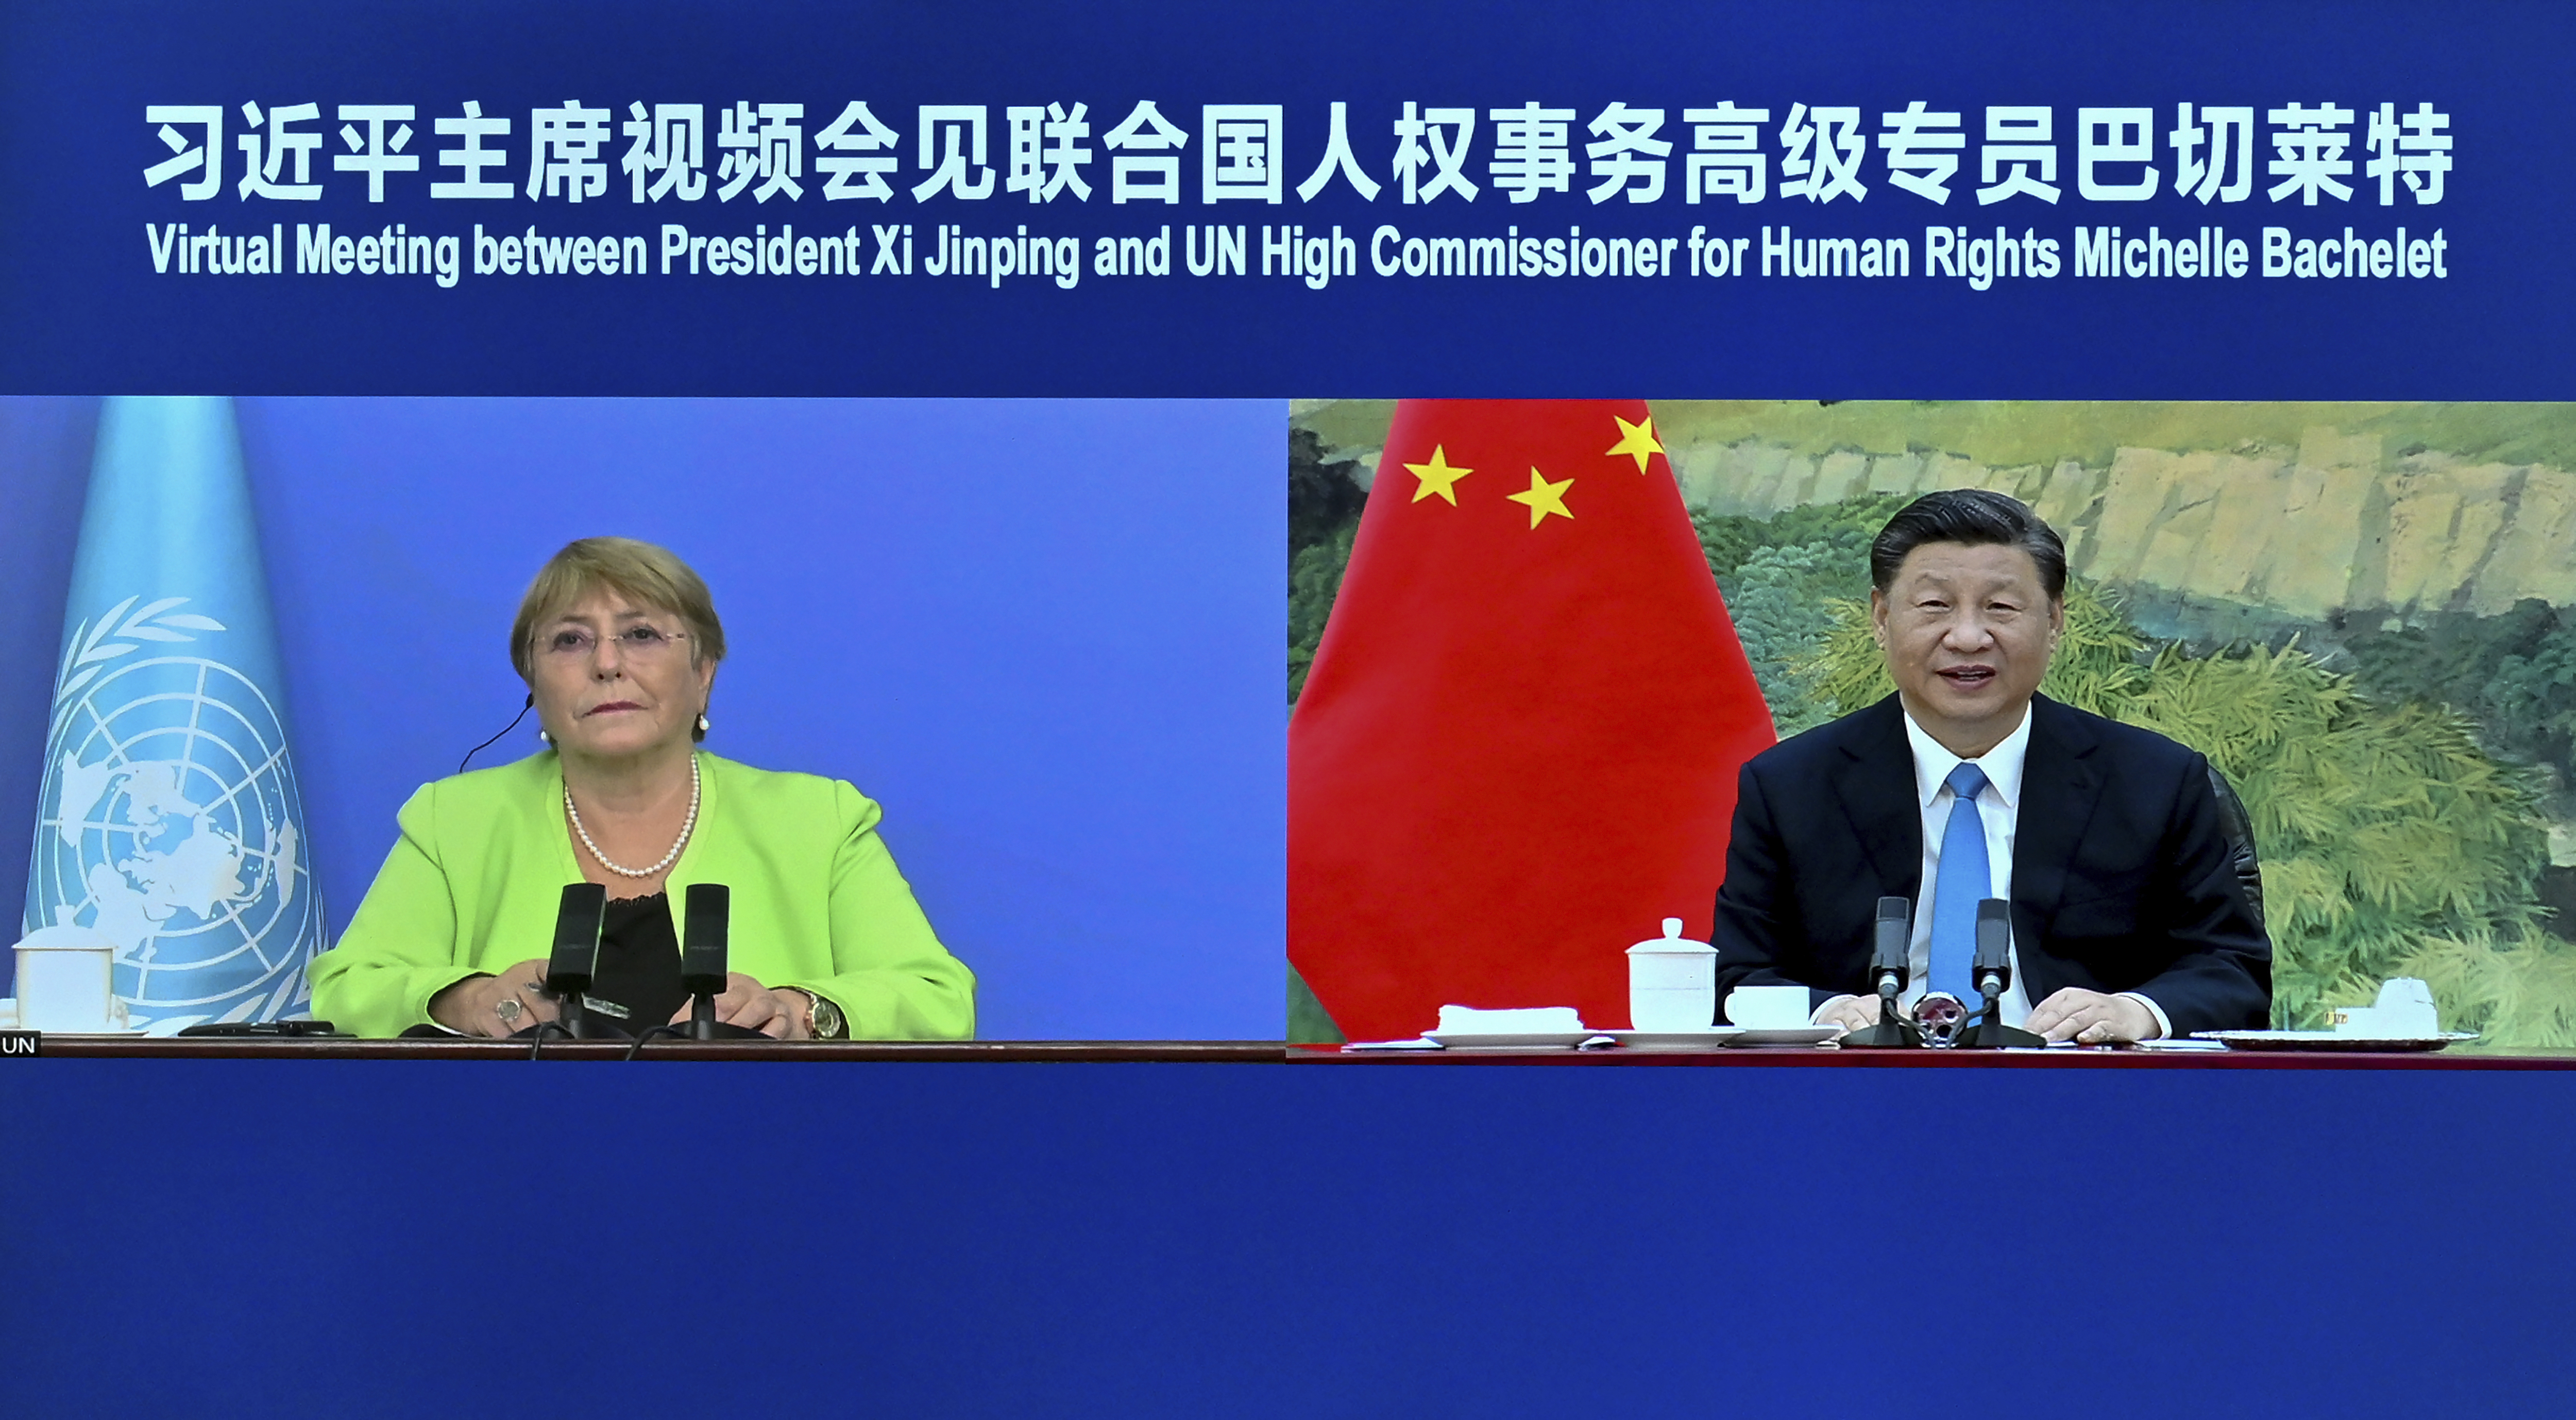 A screen showing Xi Jinping holding a virtual meeting with Michelle Bachelet